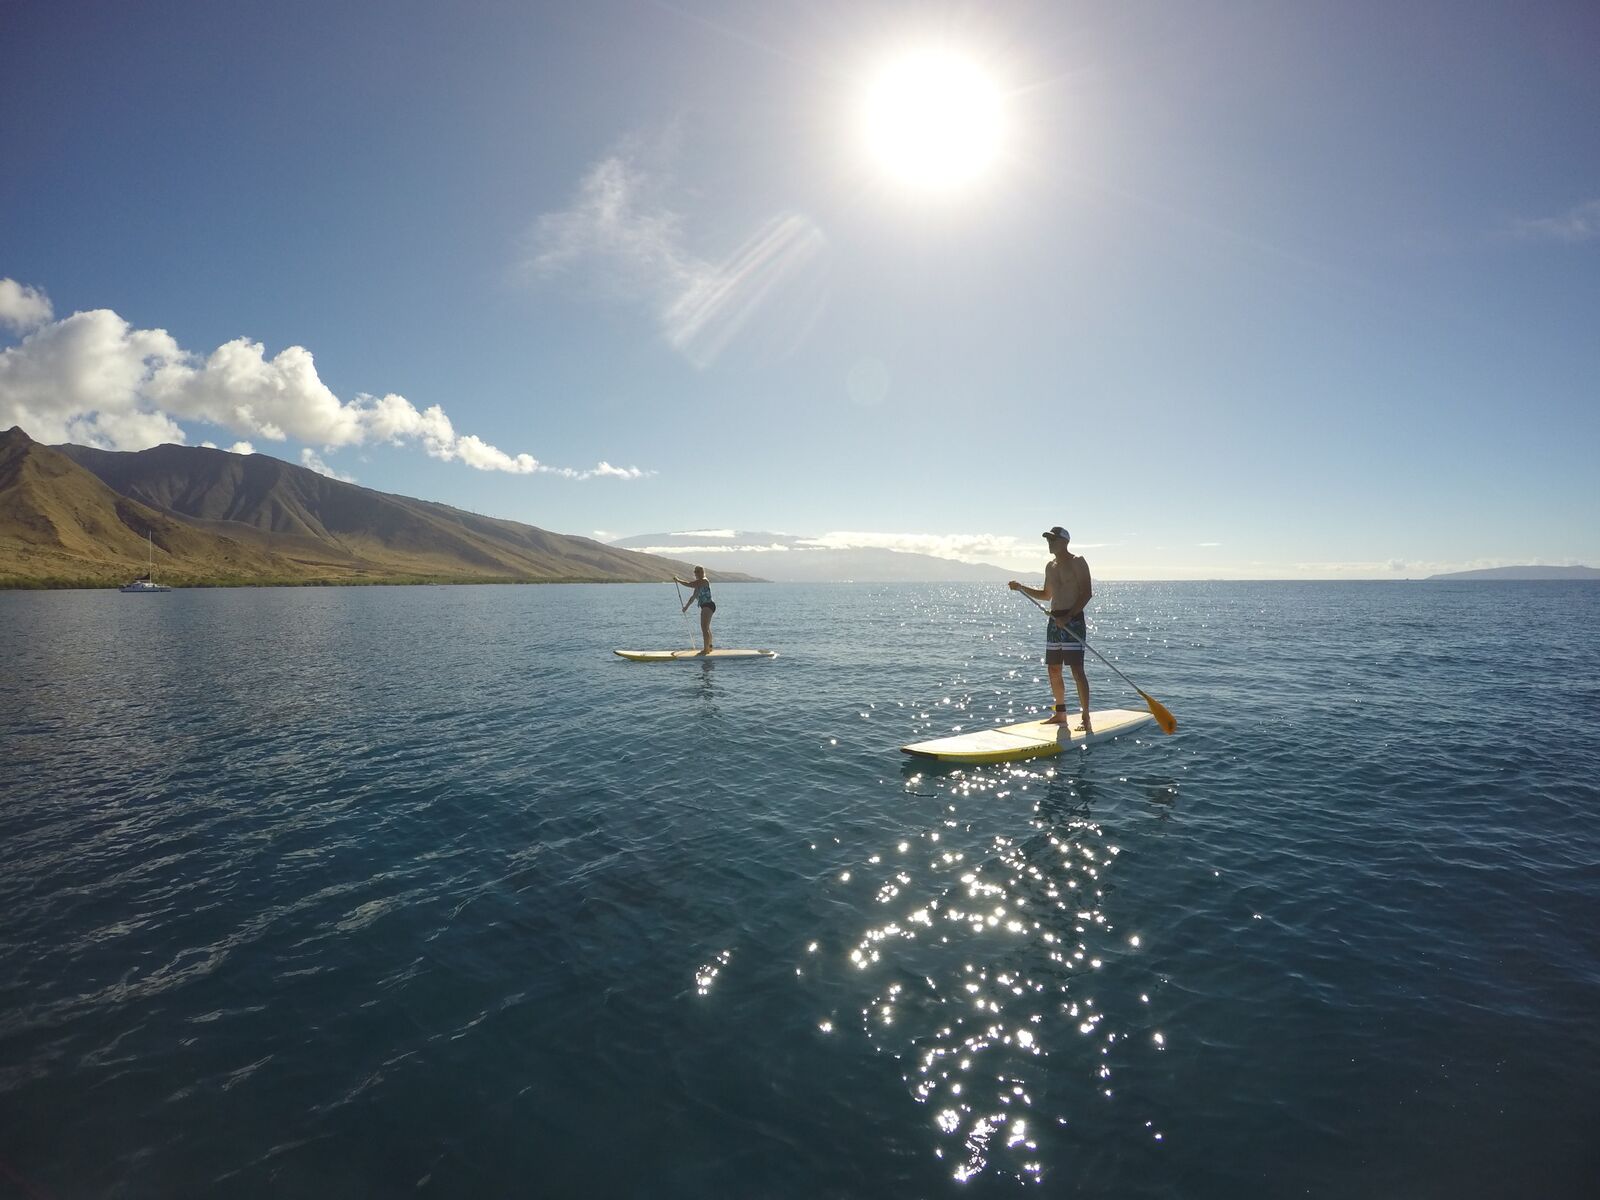 Learn Stand Up Paddling With Hawaiian Paddle Sports While On Maui Vacation